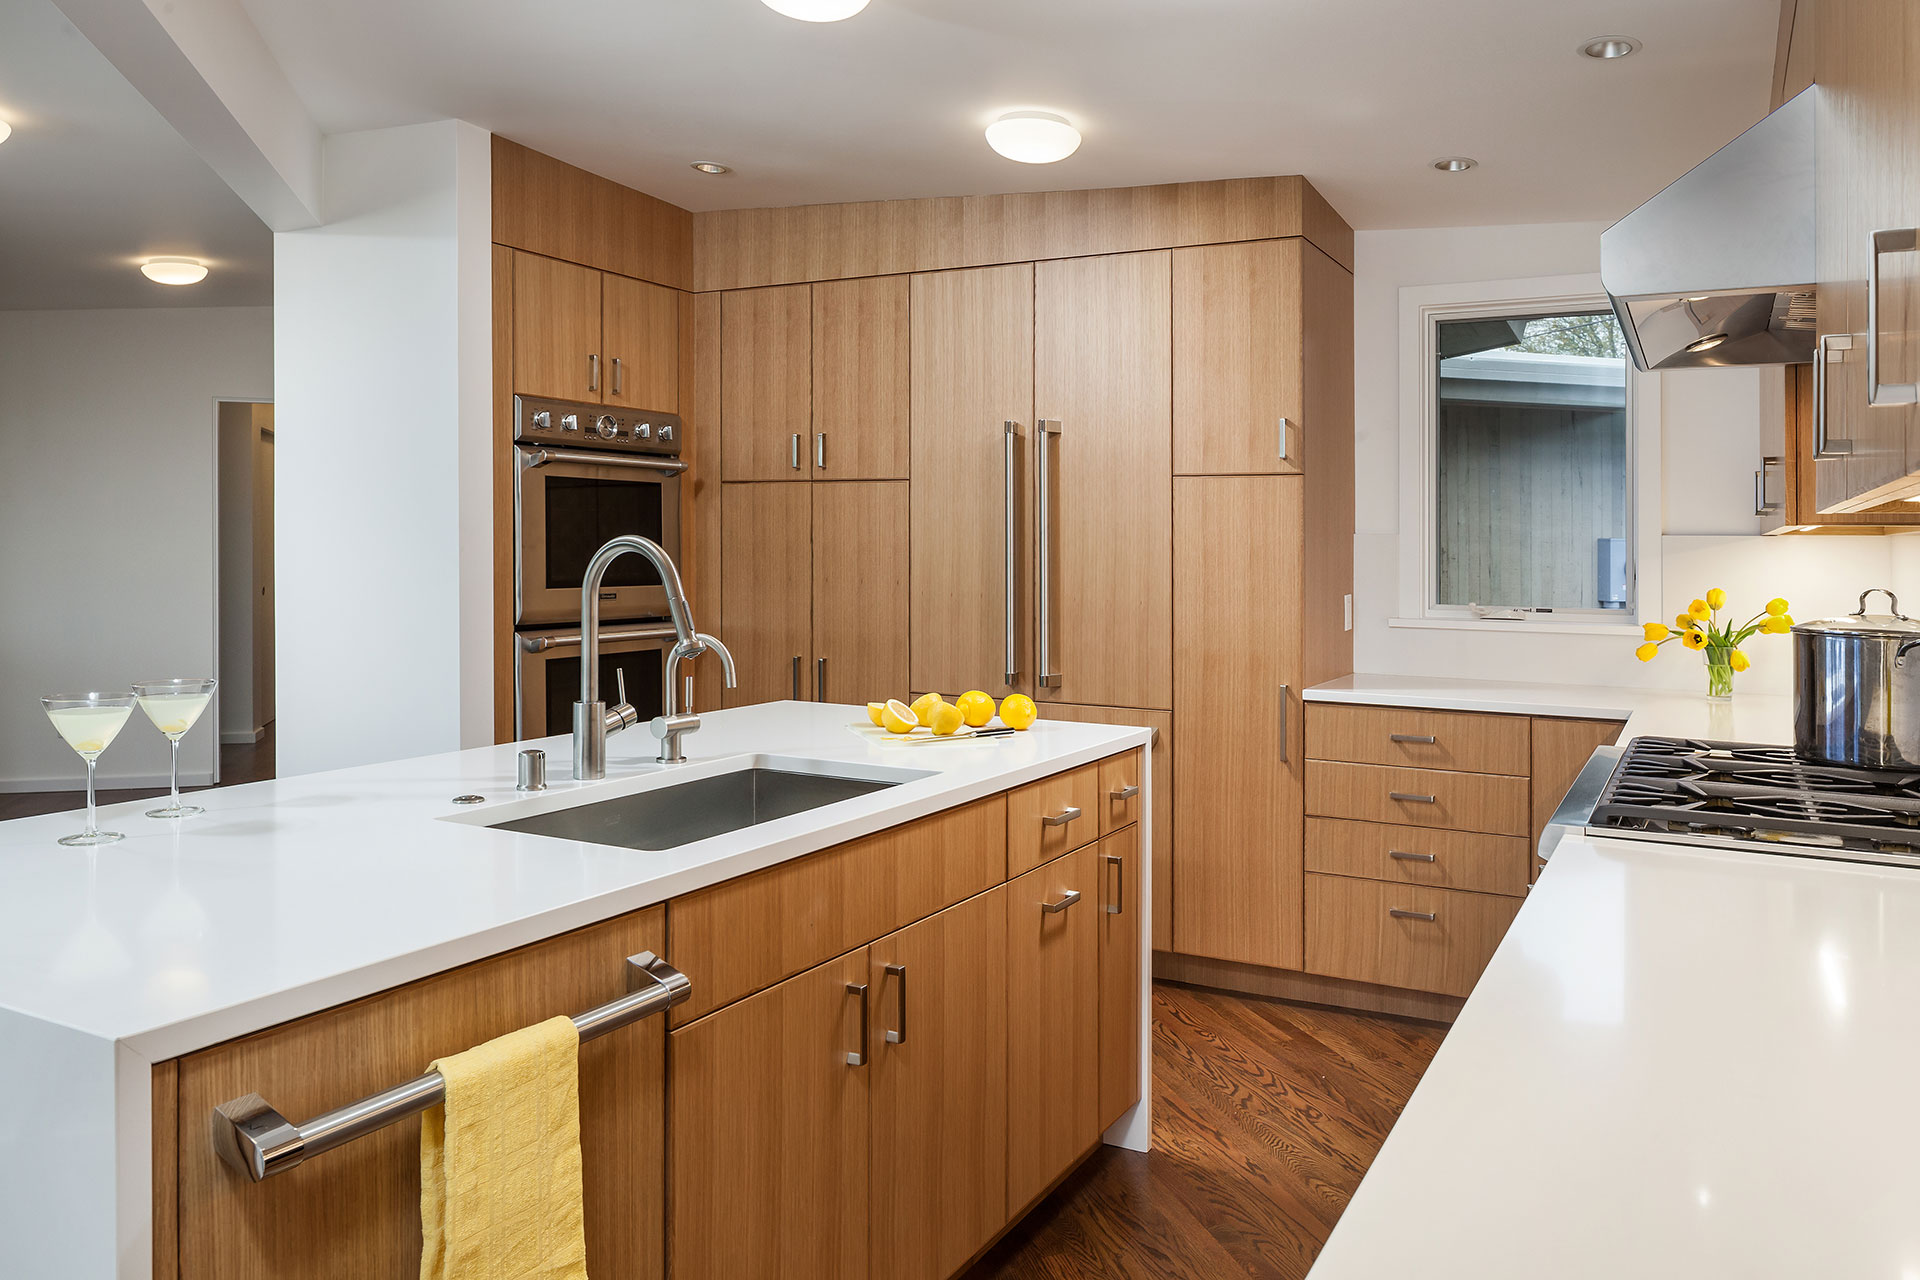 After the mid-century home remodel, the kitchen features a built in refrigerator and dishwasher with custom panels that match the adjacent cabinetry.